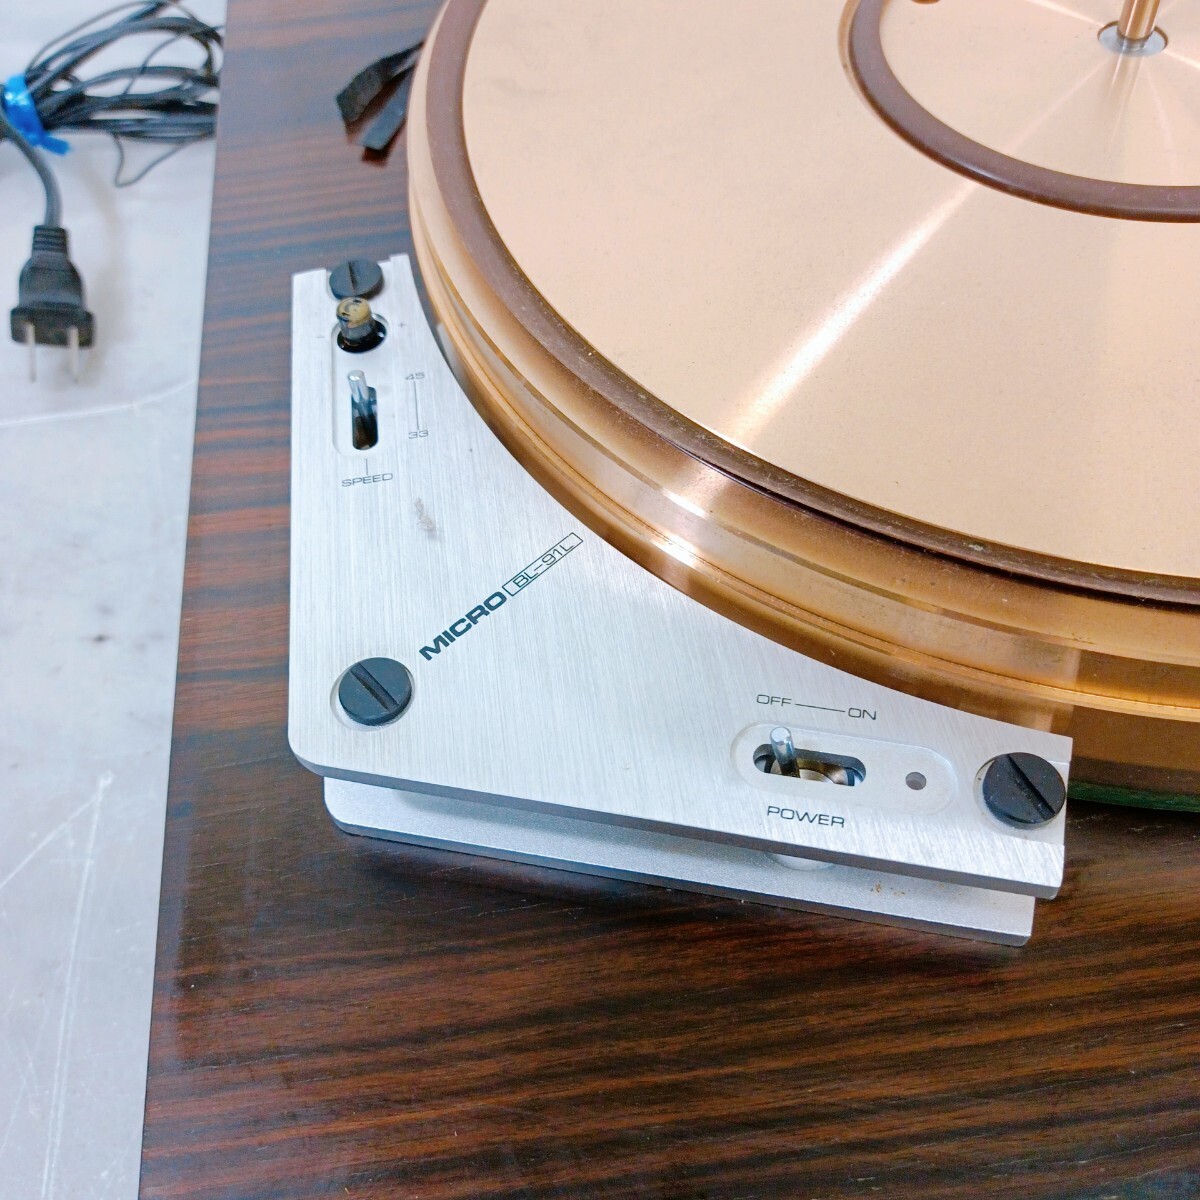 MICRO micro record player turntable BL-91 shaft assembly attaching electrification verification only Junk 